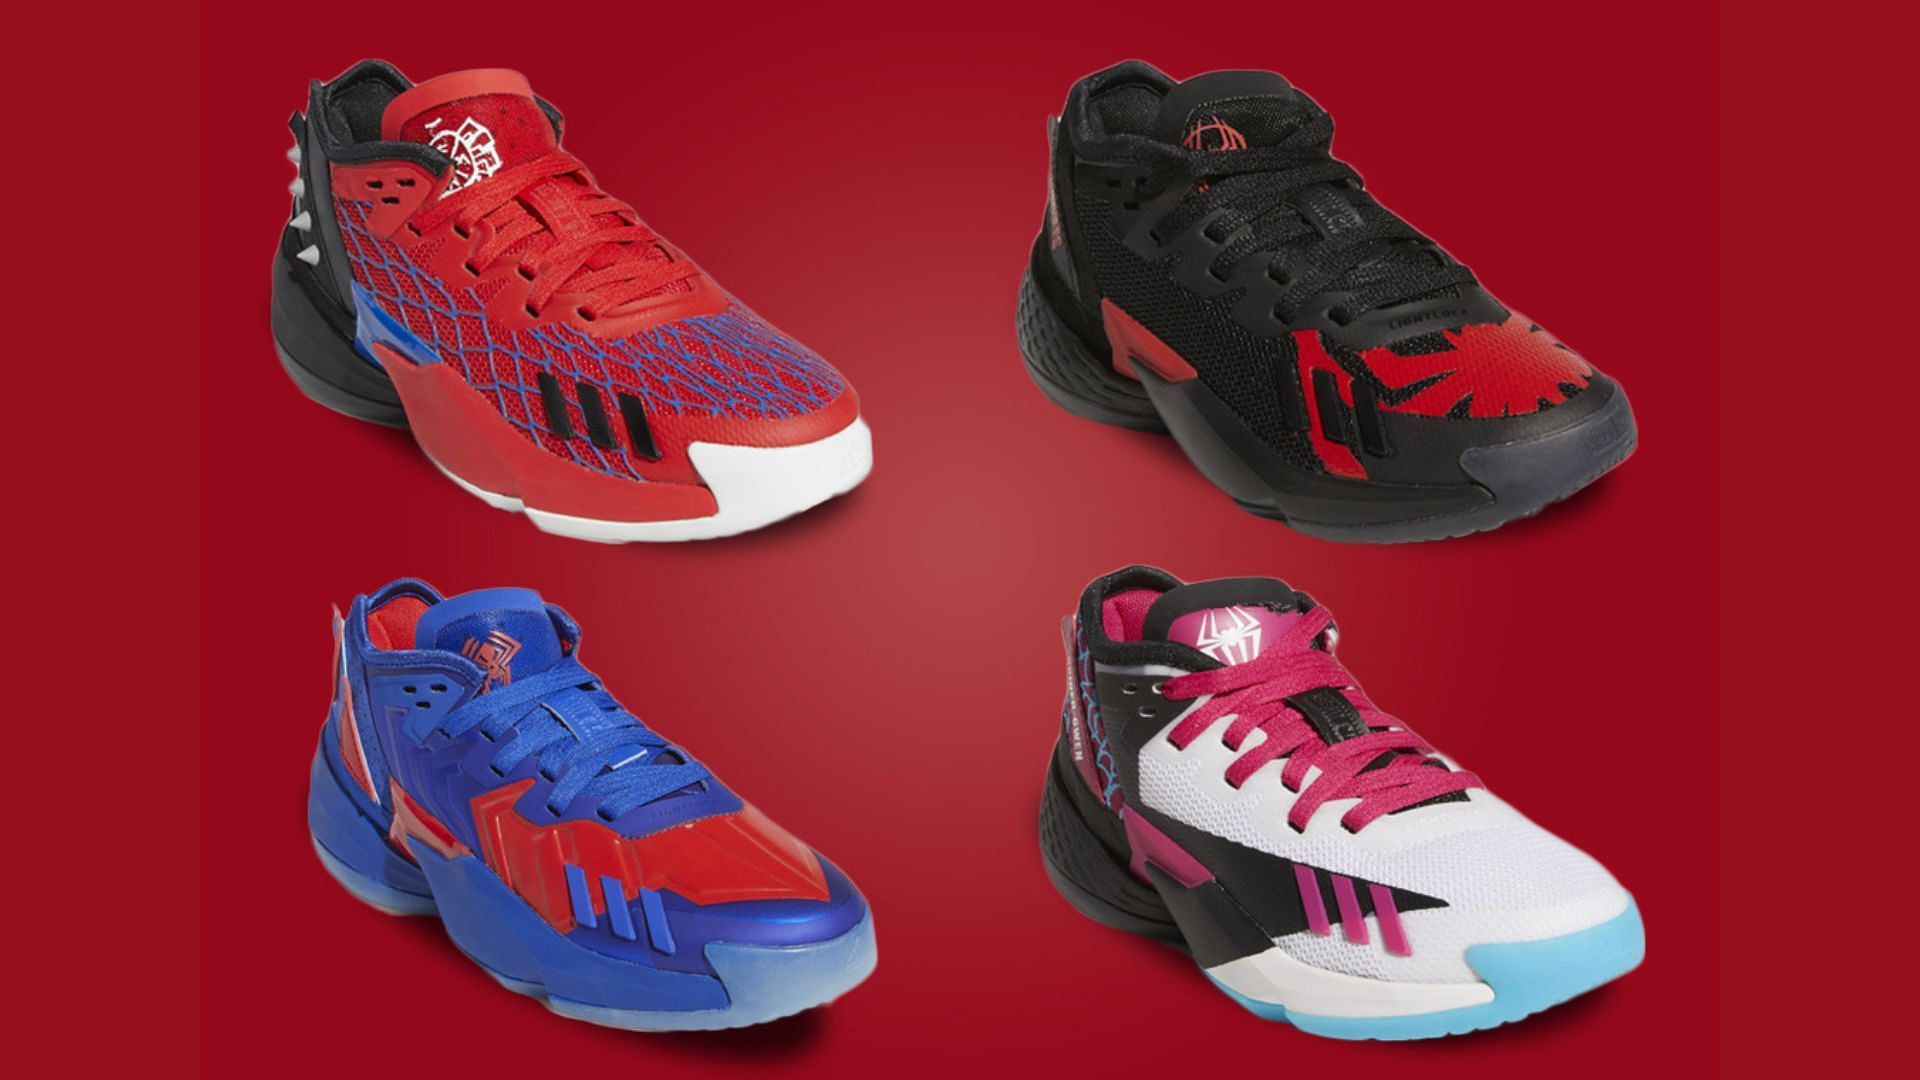 tristeza derrocamiento Hija Where to buy Marvel x Adidas D.O.N. Issue #4 Spider-Man: Across The  Spider-verse sneaker pack? Price, release date, and more details explored